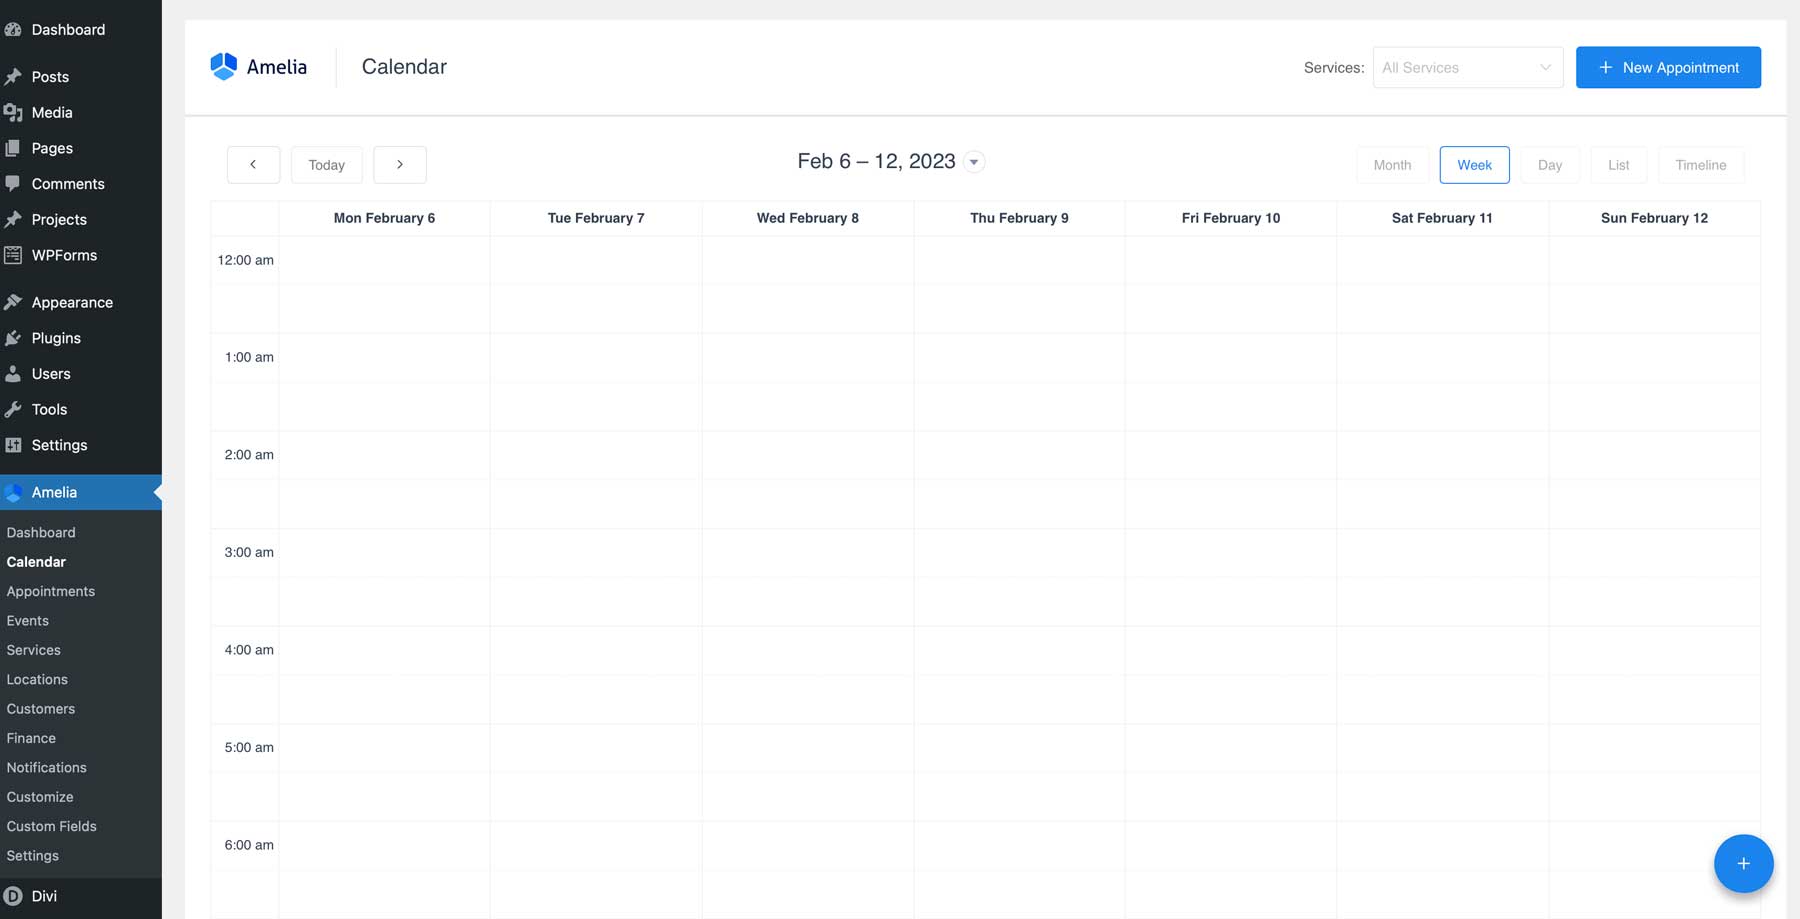 The back-end calendar view of the Amelia WordPress booking plugin